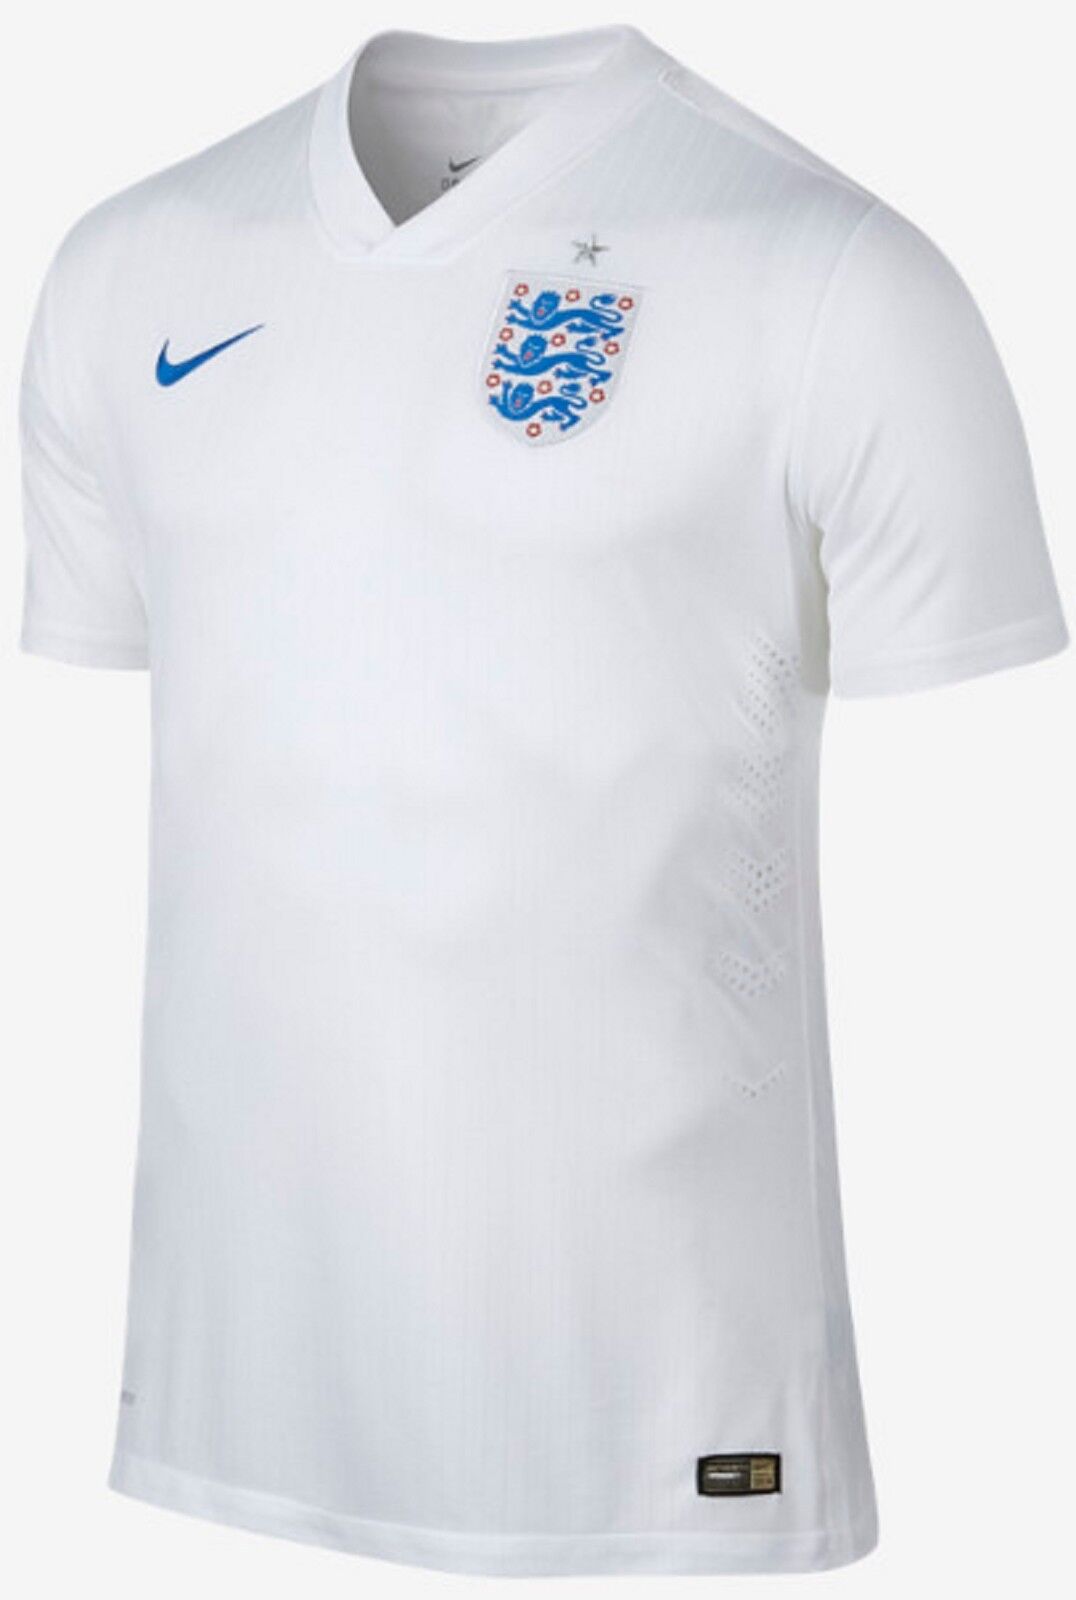 New Nike National Team Stadium Soccer Jersey 2014 FIFA World Cup Pck 1 Home/Away